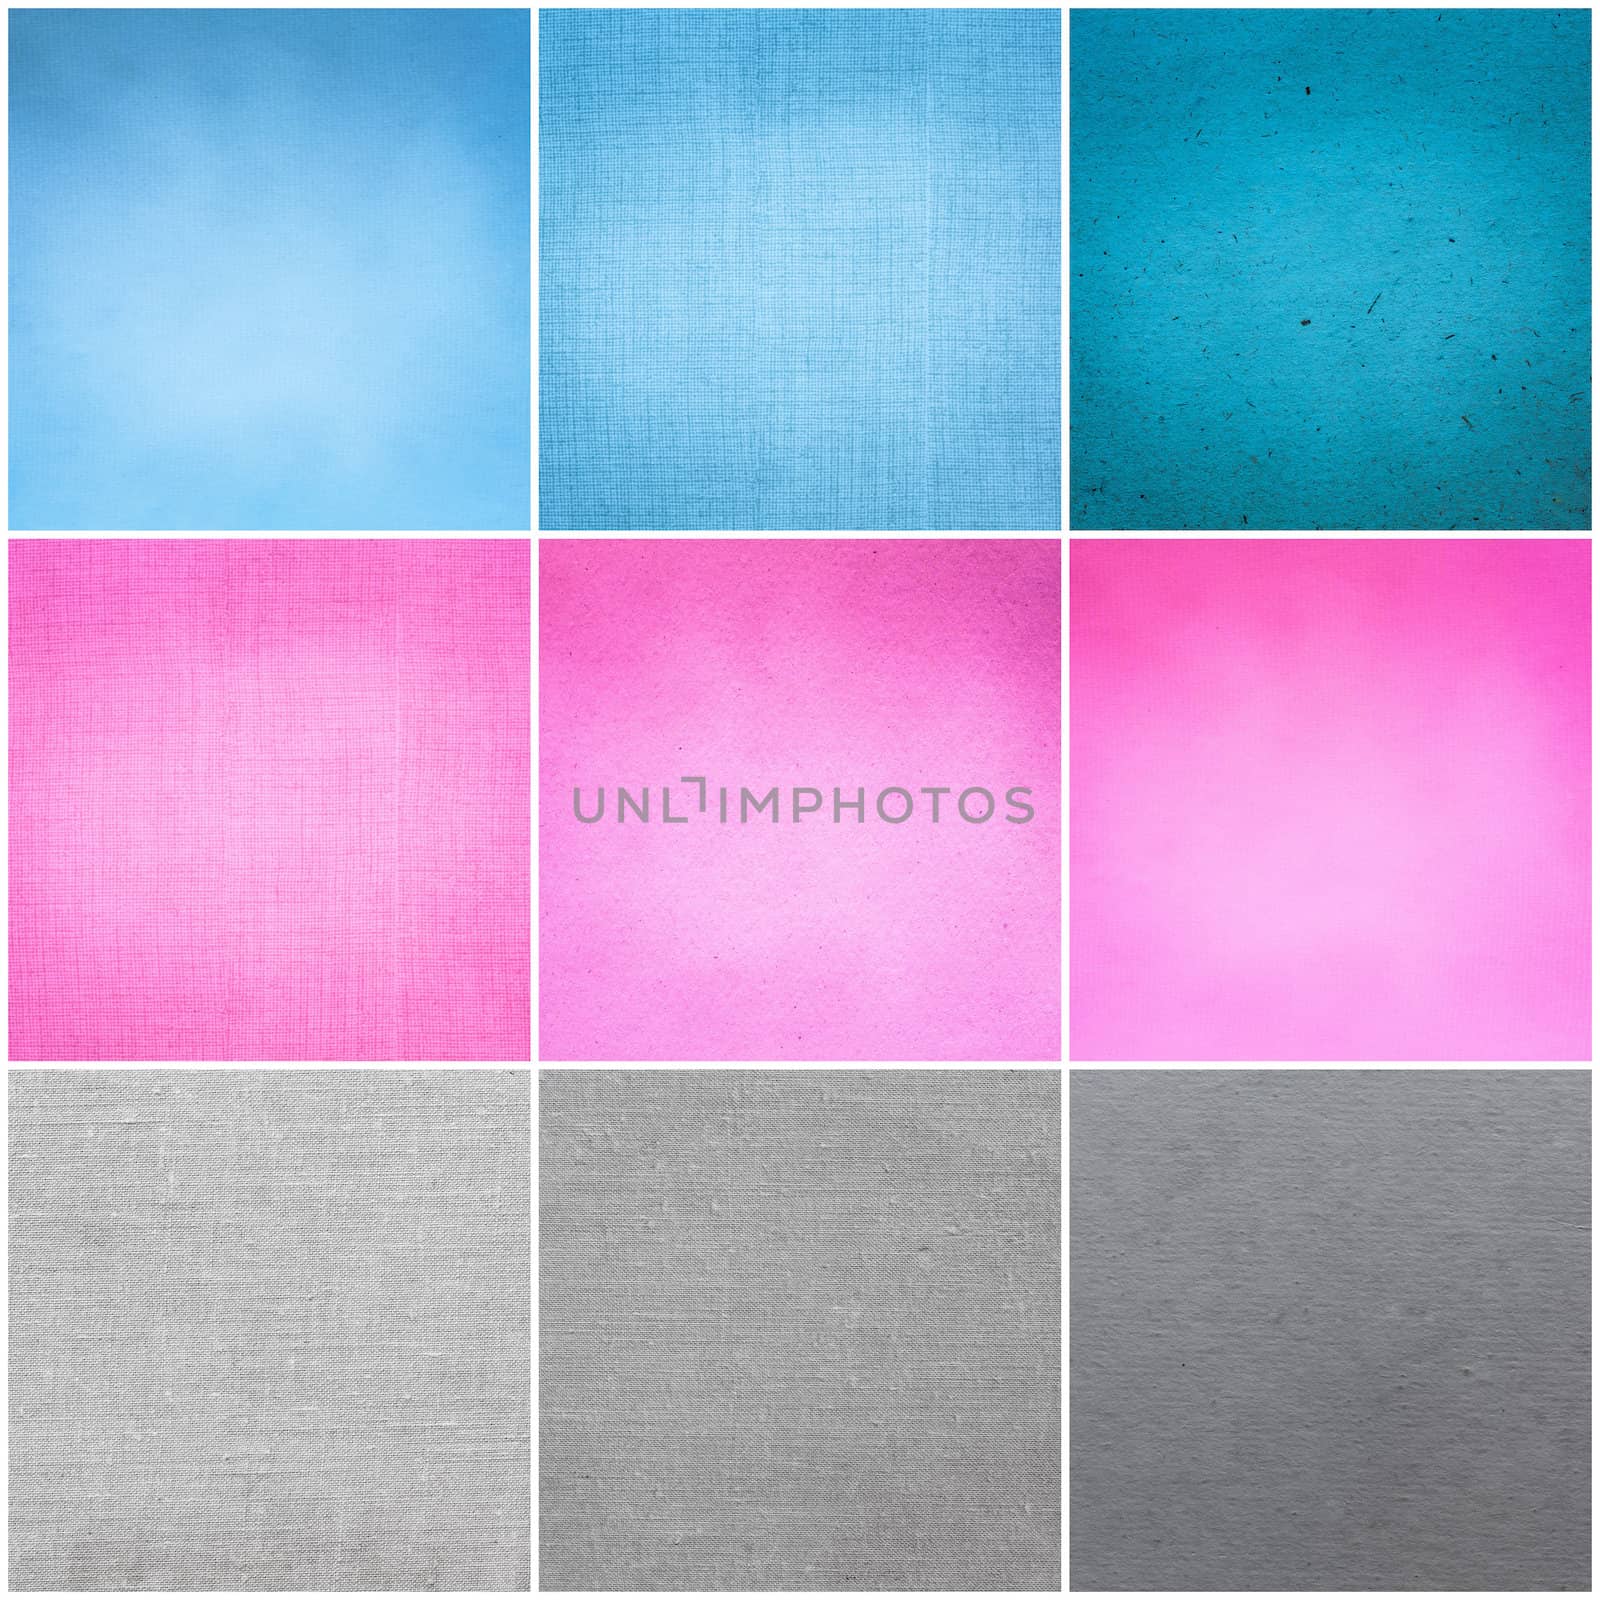 Old Vintage Papers Texture Set  (Blue, Pink, Grey) Background by ryhor